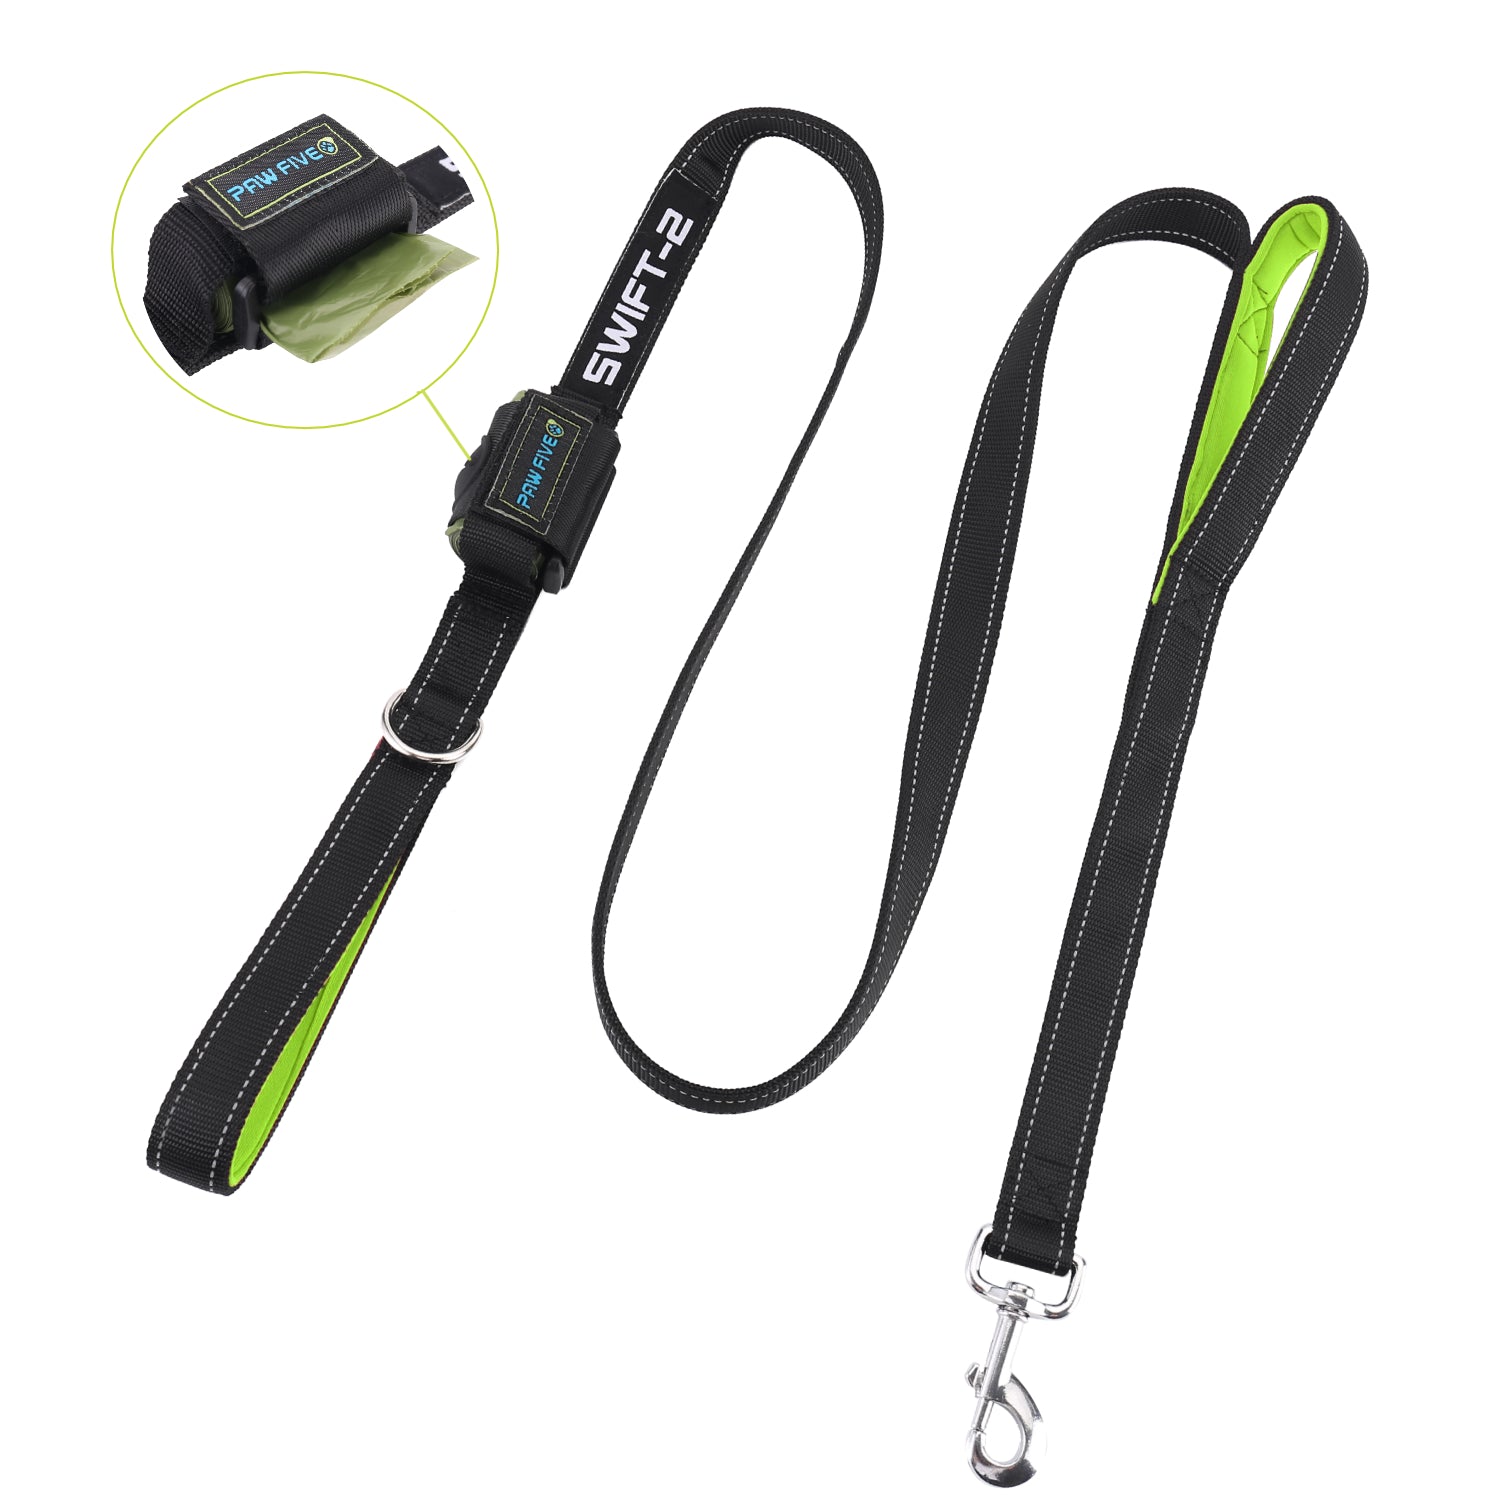 The Best Dog Leash of 2021 - Paw Five SWIFT-2 Dog Leash 6 Foot in Length